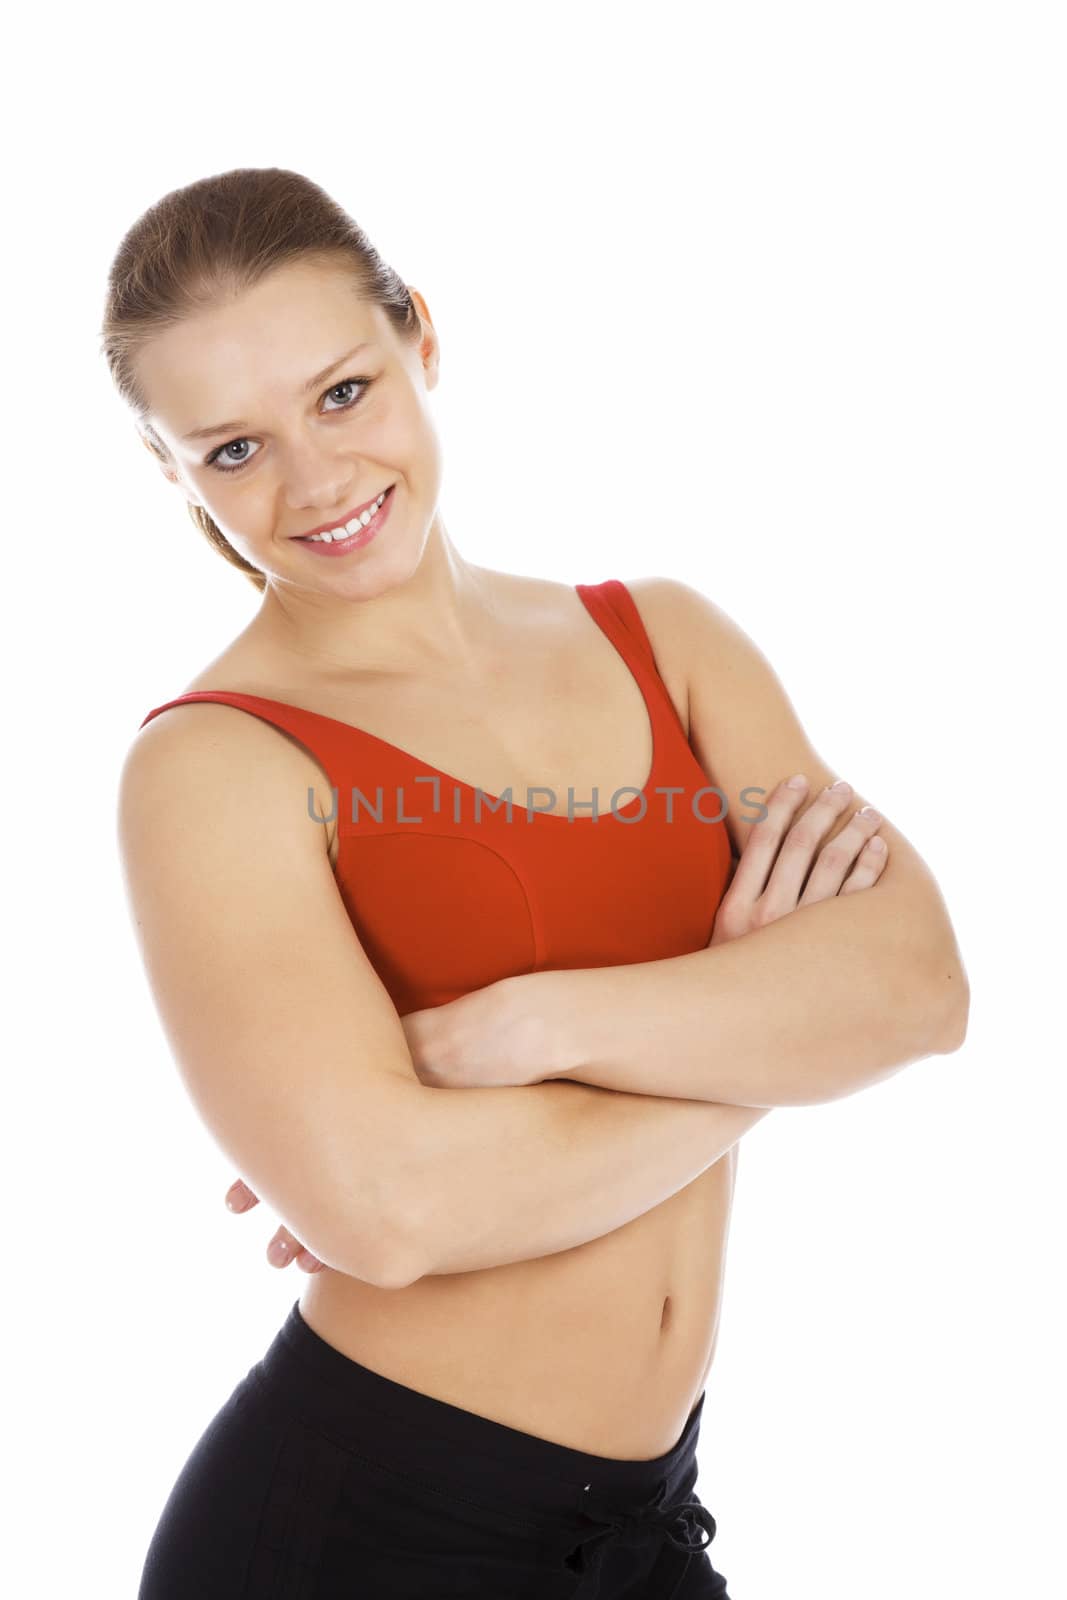 Smiling young sporty woman. Isolated over white background